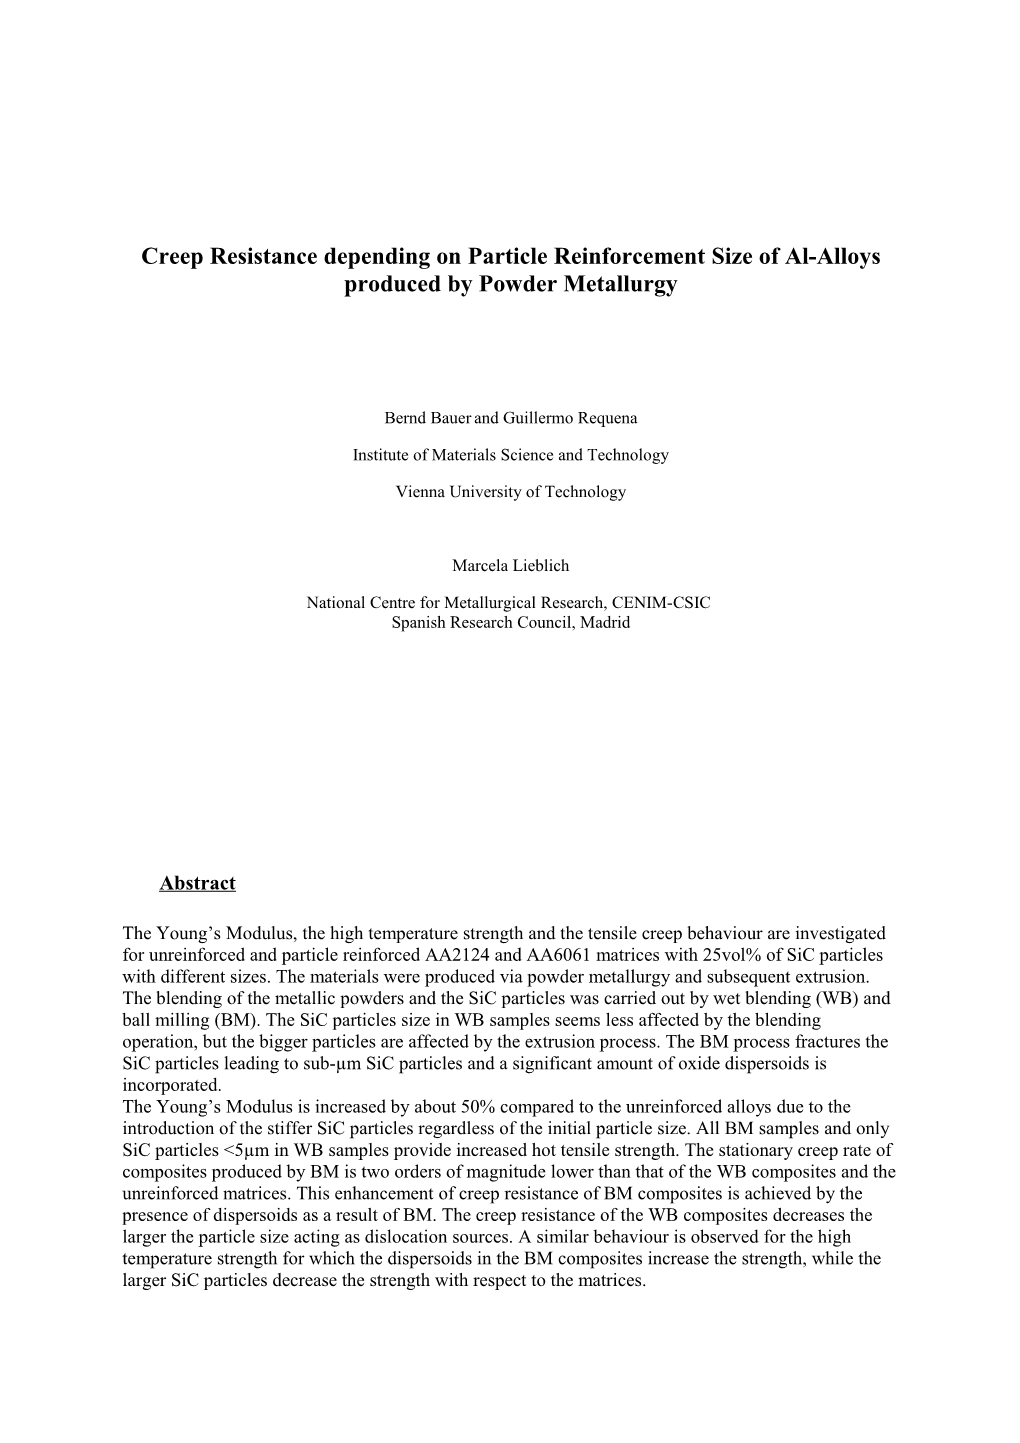 Creep Resistance Depending on Particle Reinforcement Size of Al-Alloys Produced by Powder